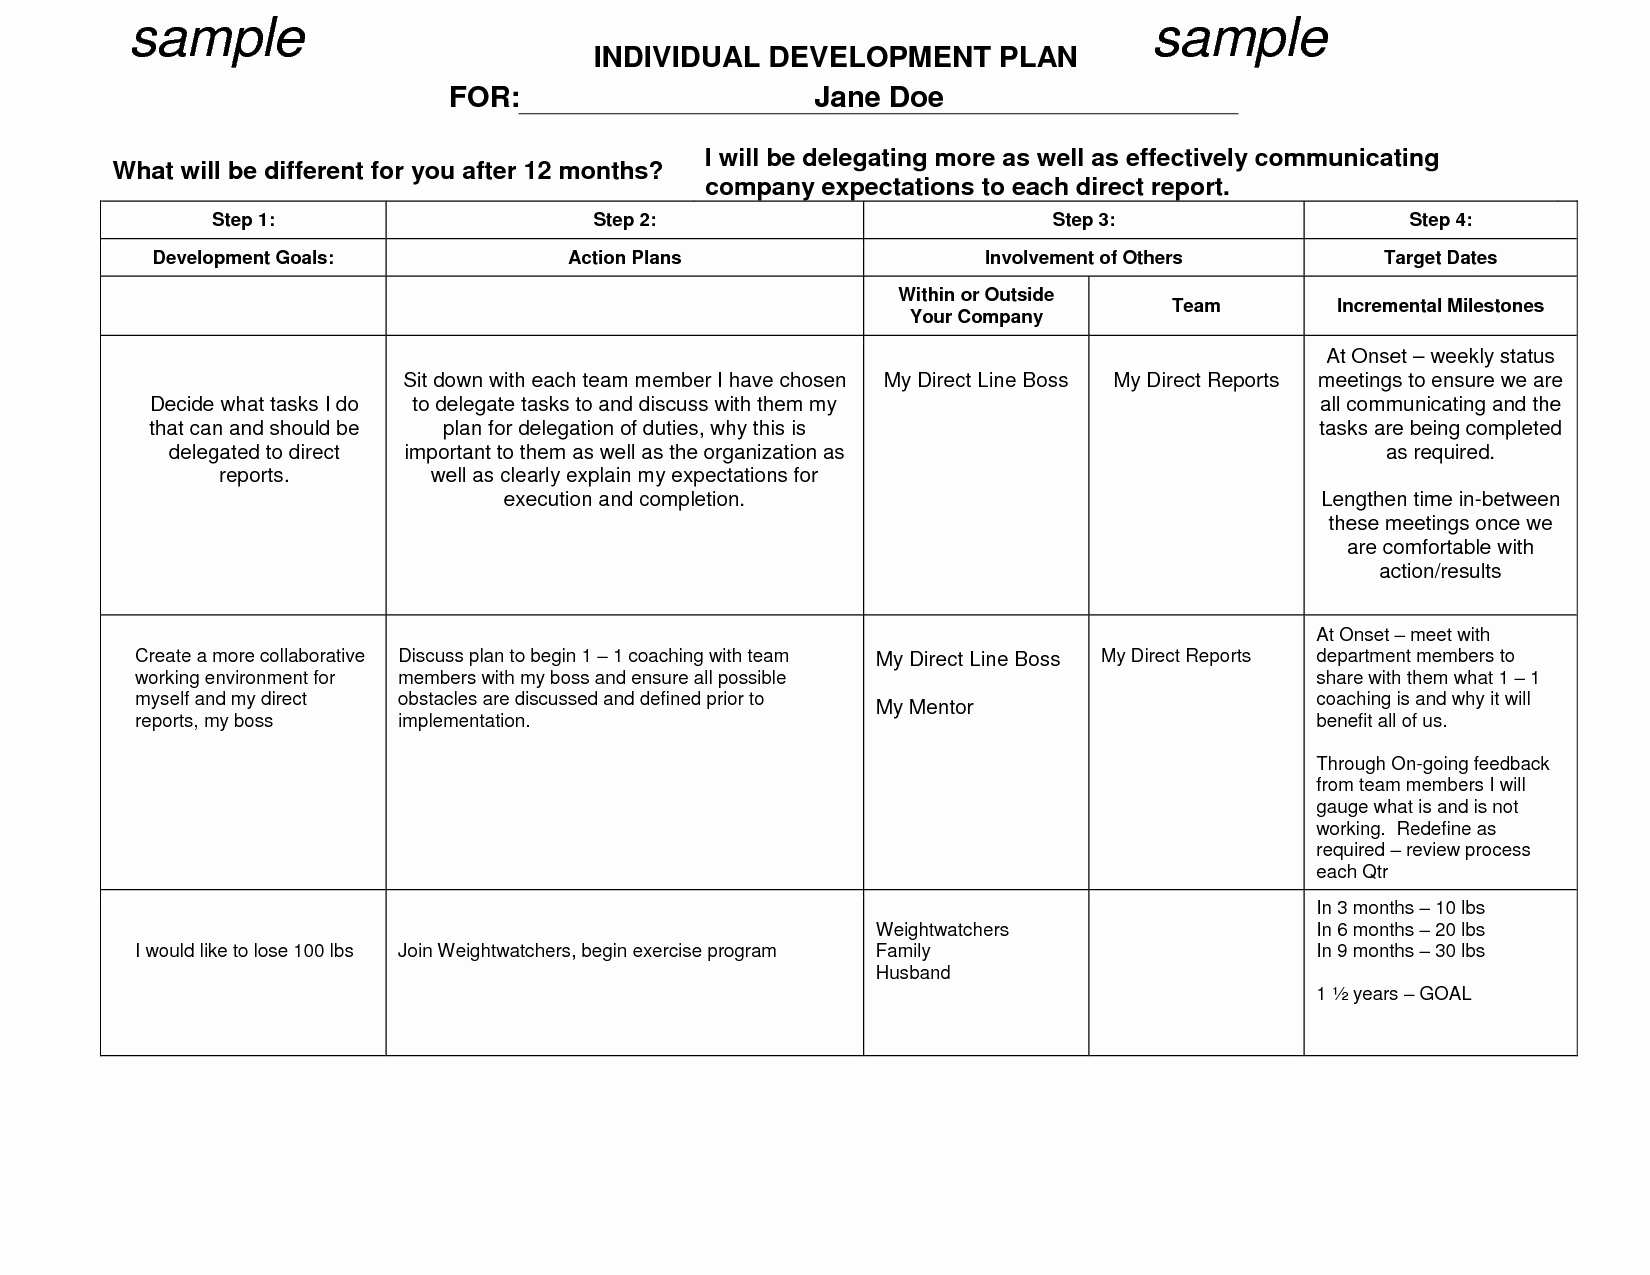 Individual Development Plan Examples Inspirational Personal Development Examples for Work Plan Pdf Growth